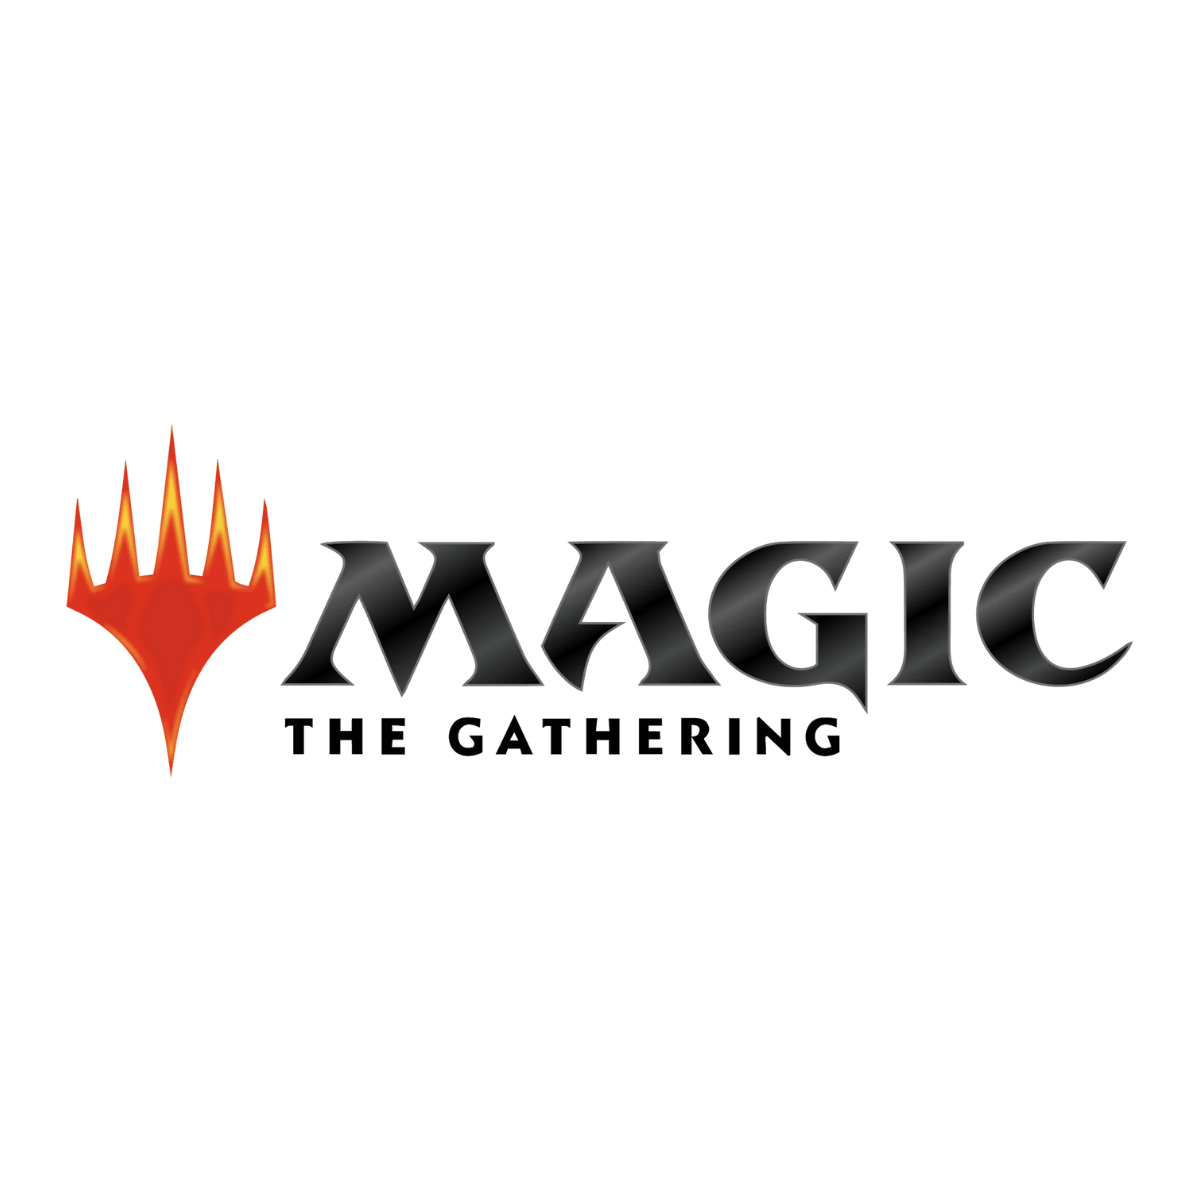 Magic: The Gathering Character Sleeve Collection [MTGS-239] "Dominaria United - Stained Glass Ver. Swamp"-Ensky-Ace Cards & Collectibles